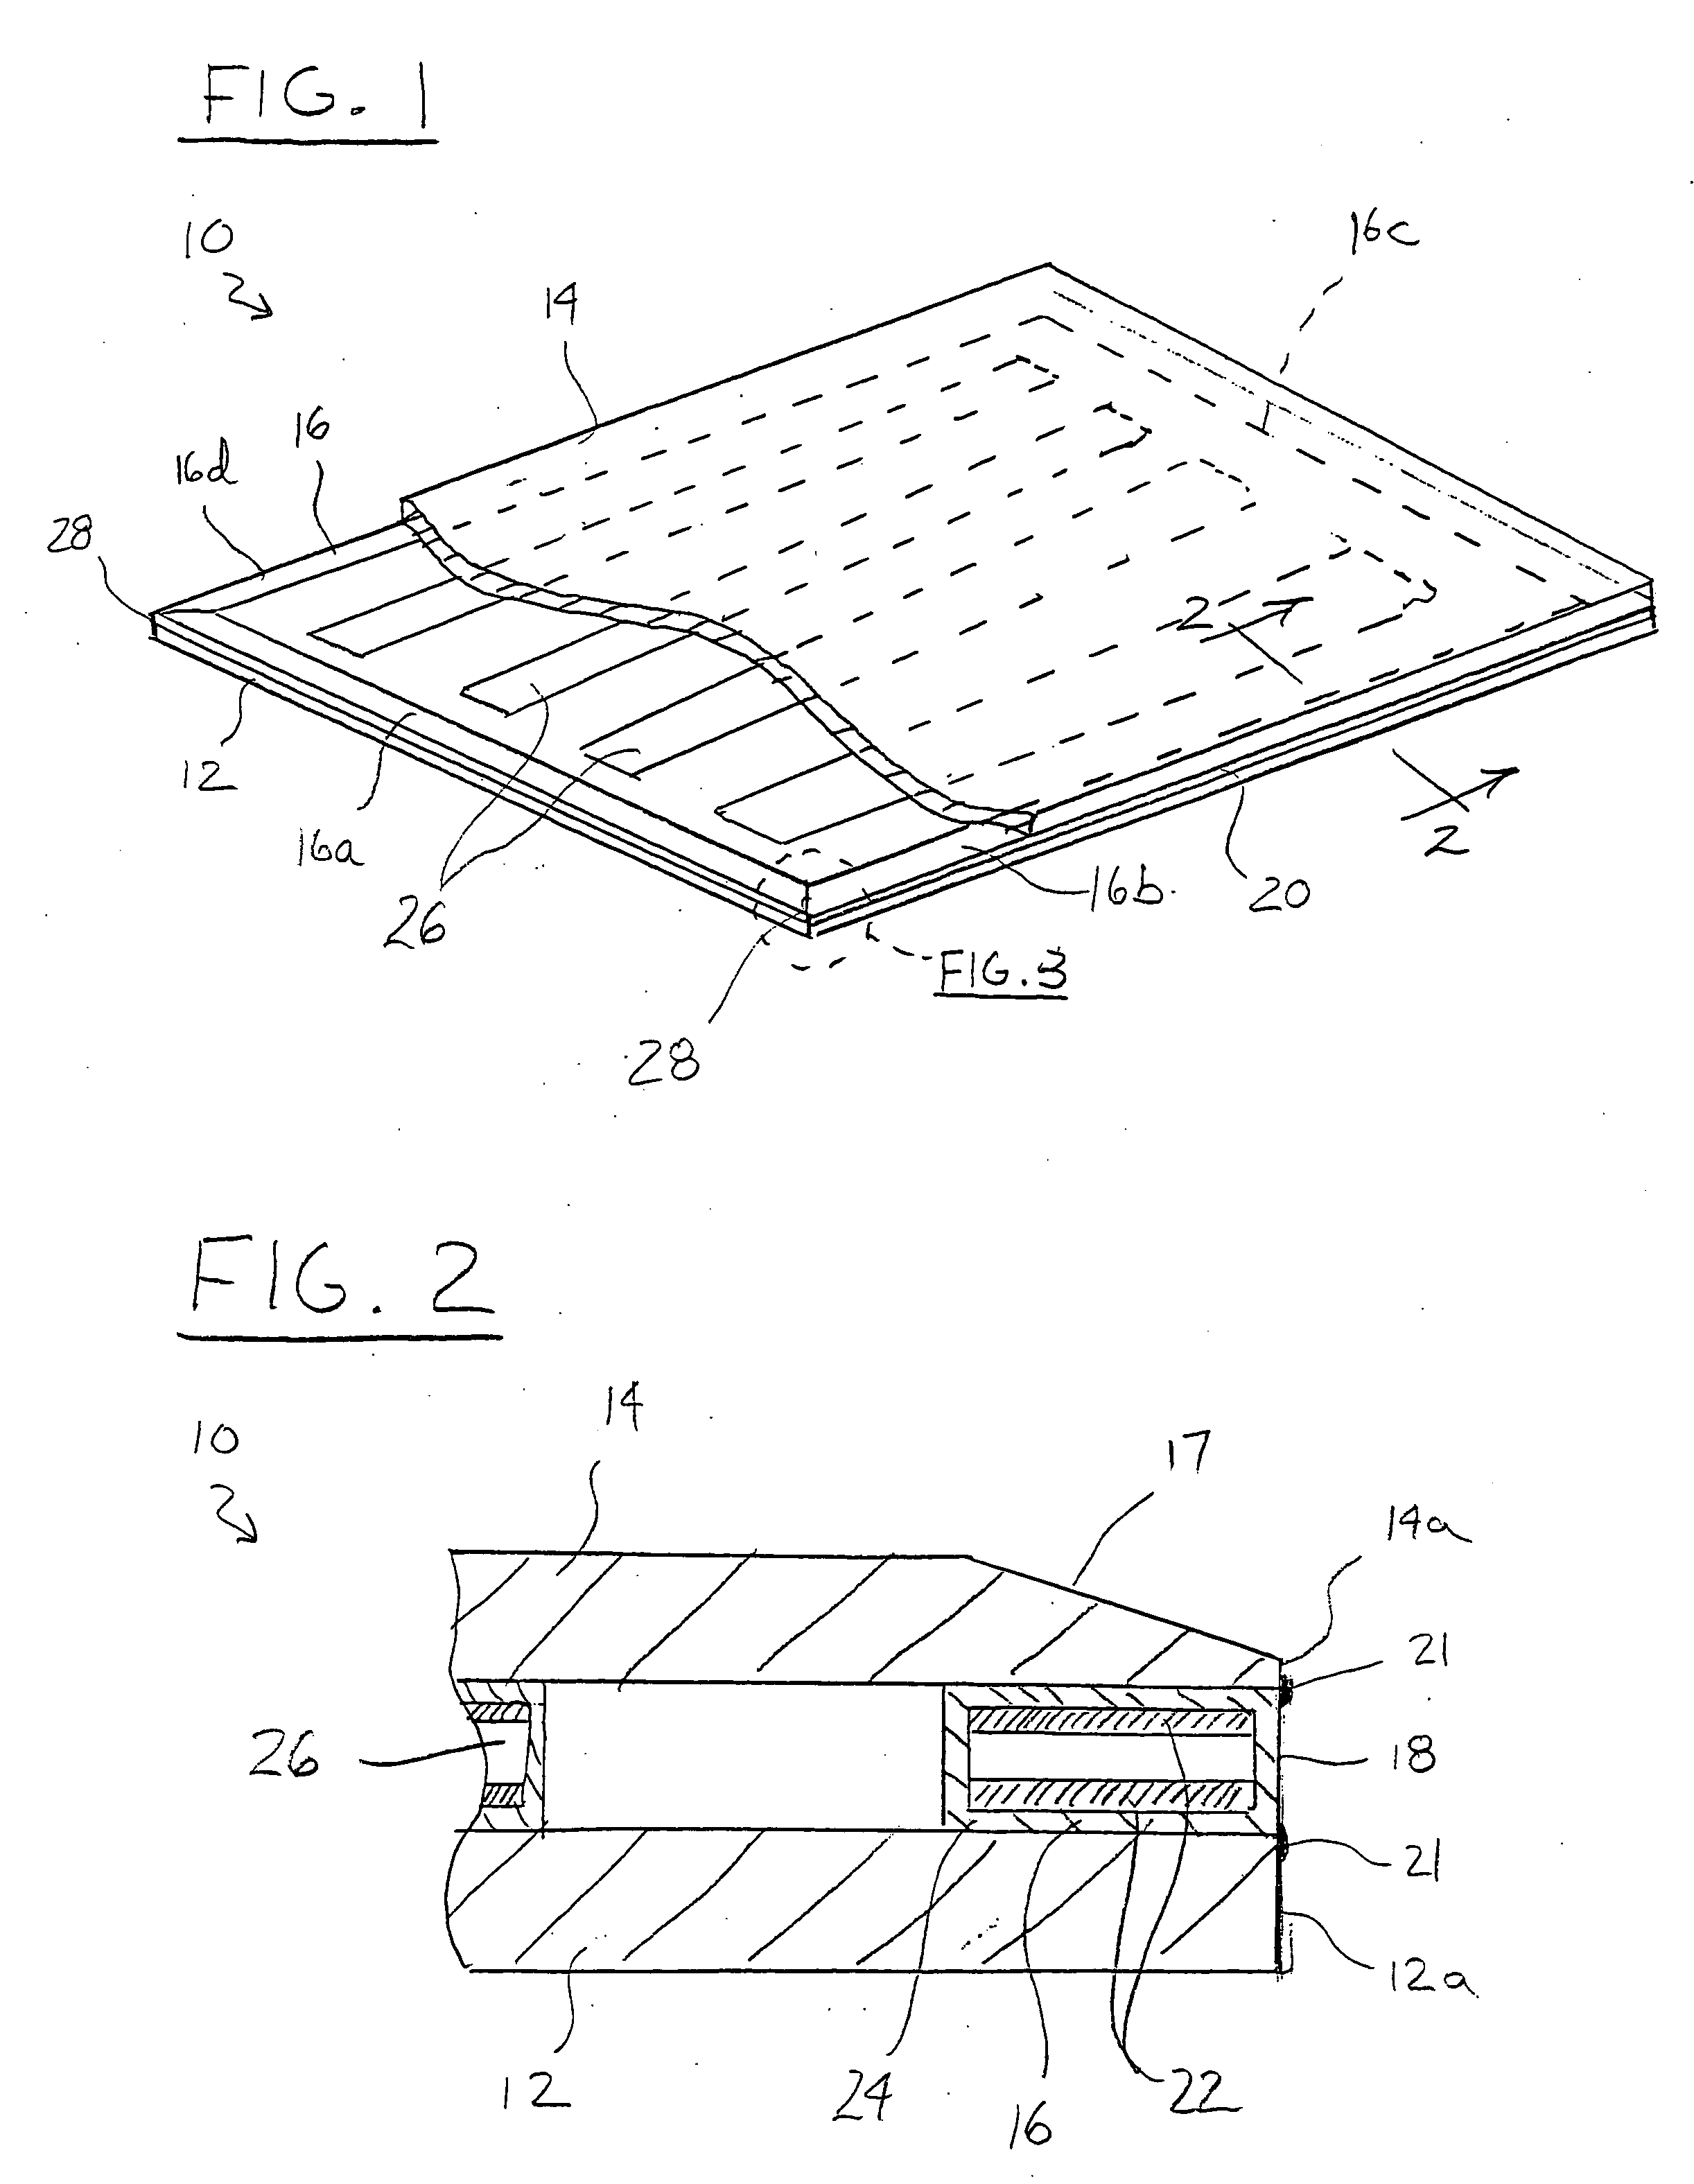 Water resistant switch mat having activation across its entire surface